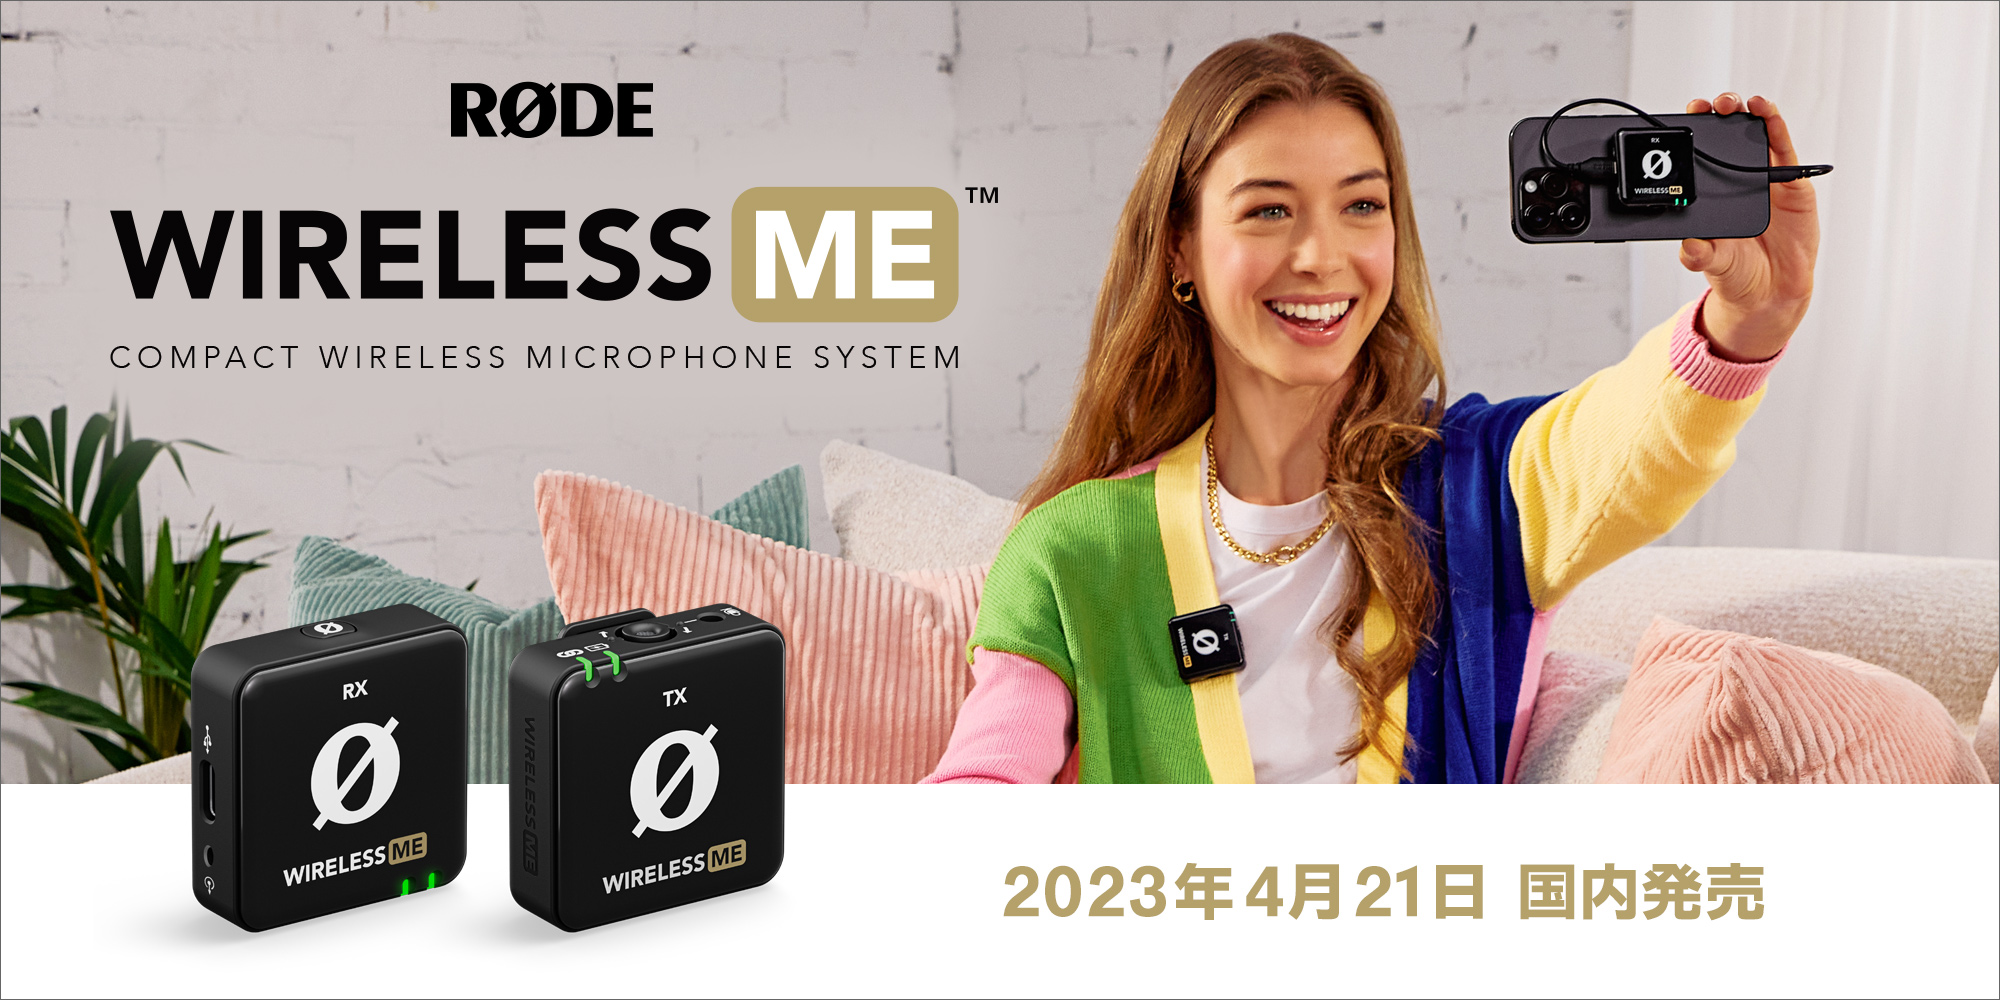 RODE WIRELESS ME ワイヤレスME